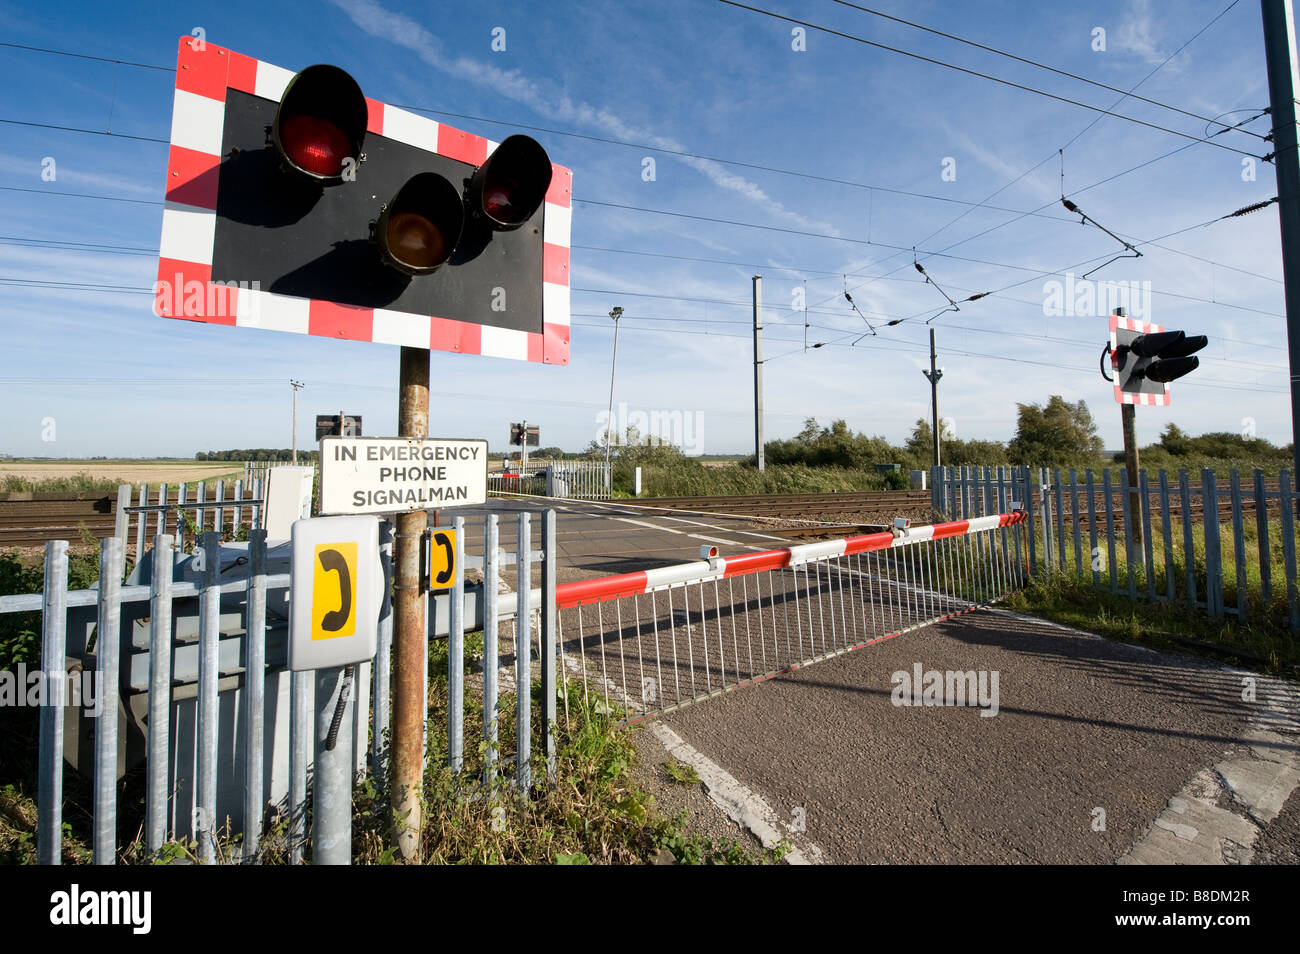 Level Crossing With Warning Lights Flashing And Barriers Down On The East Coast Main Line Railway In The Uk Stock Photo Alamy